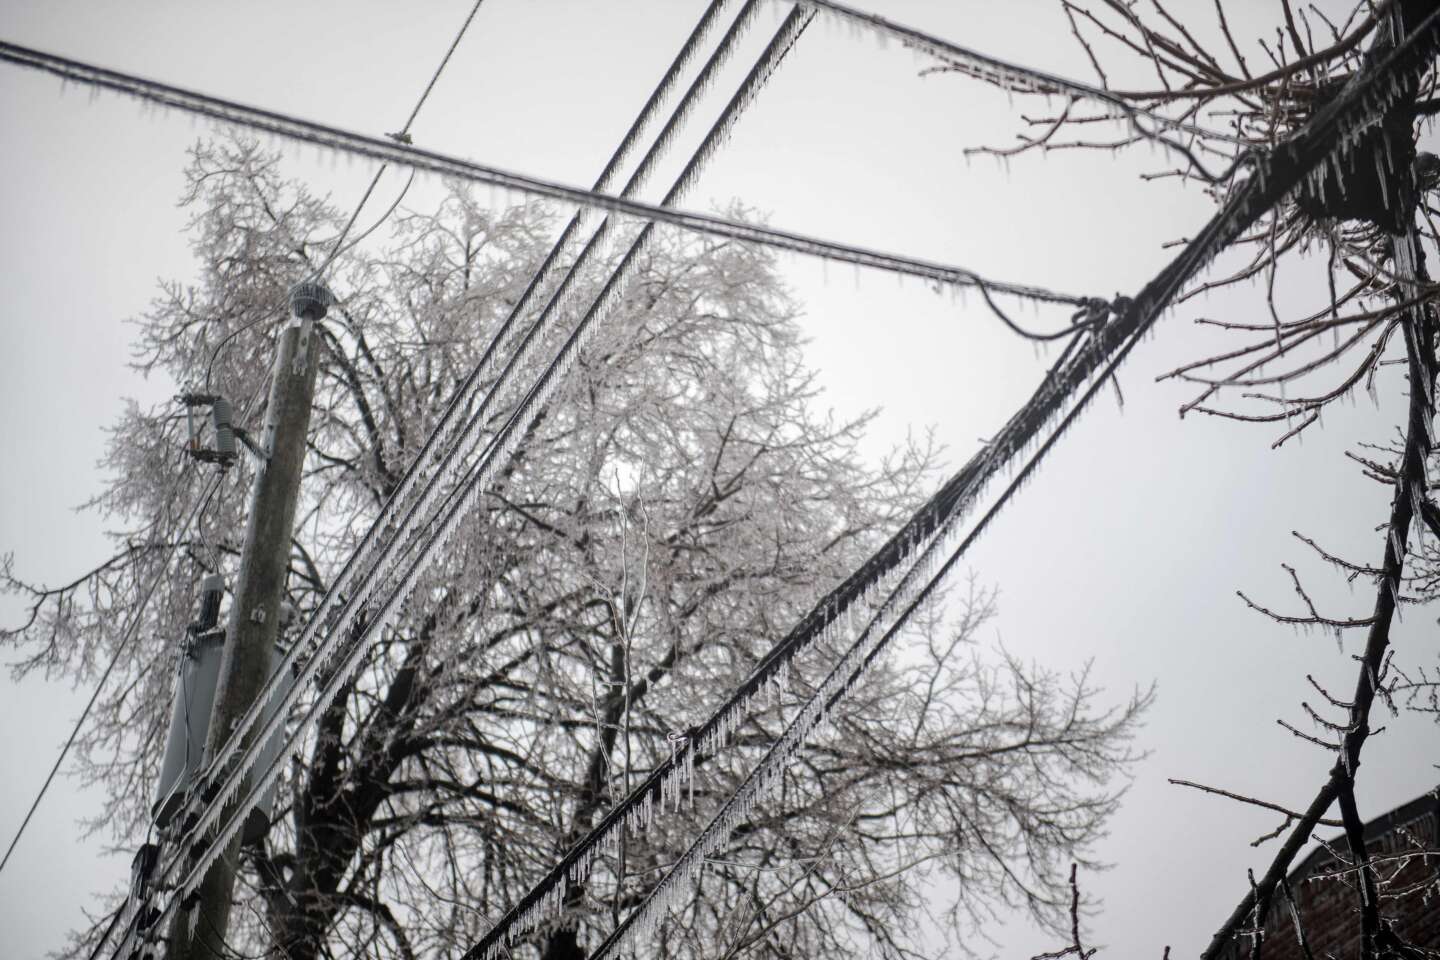 In the east of the country, millions of homes are still without electricity